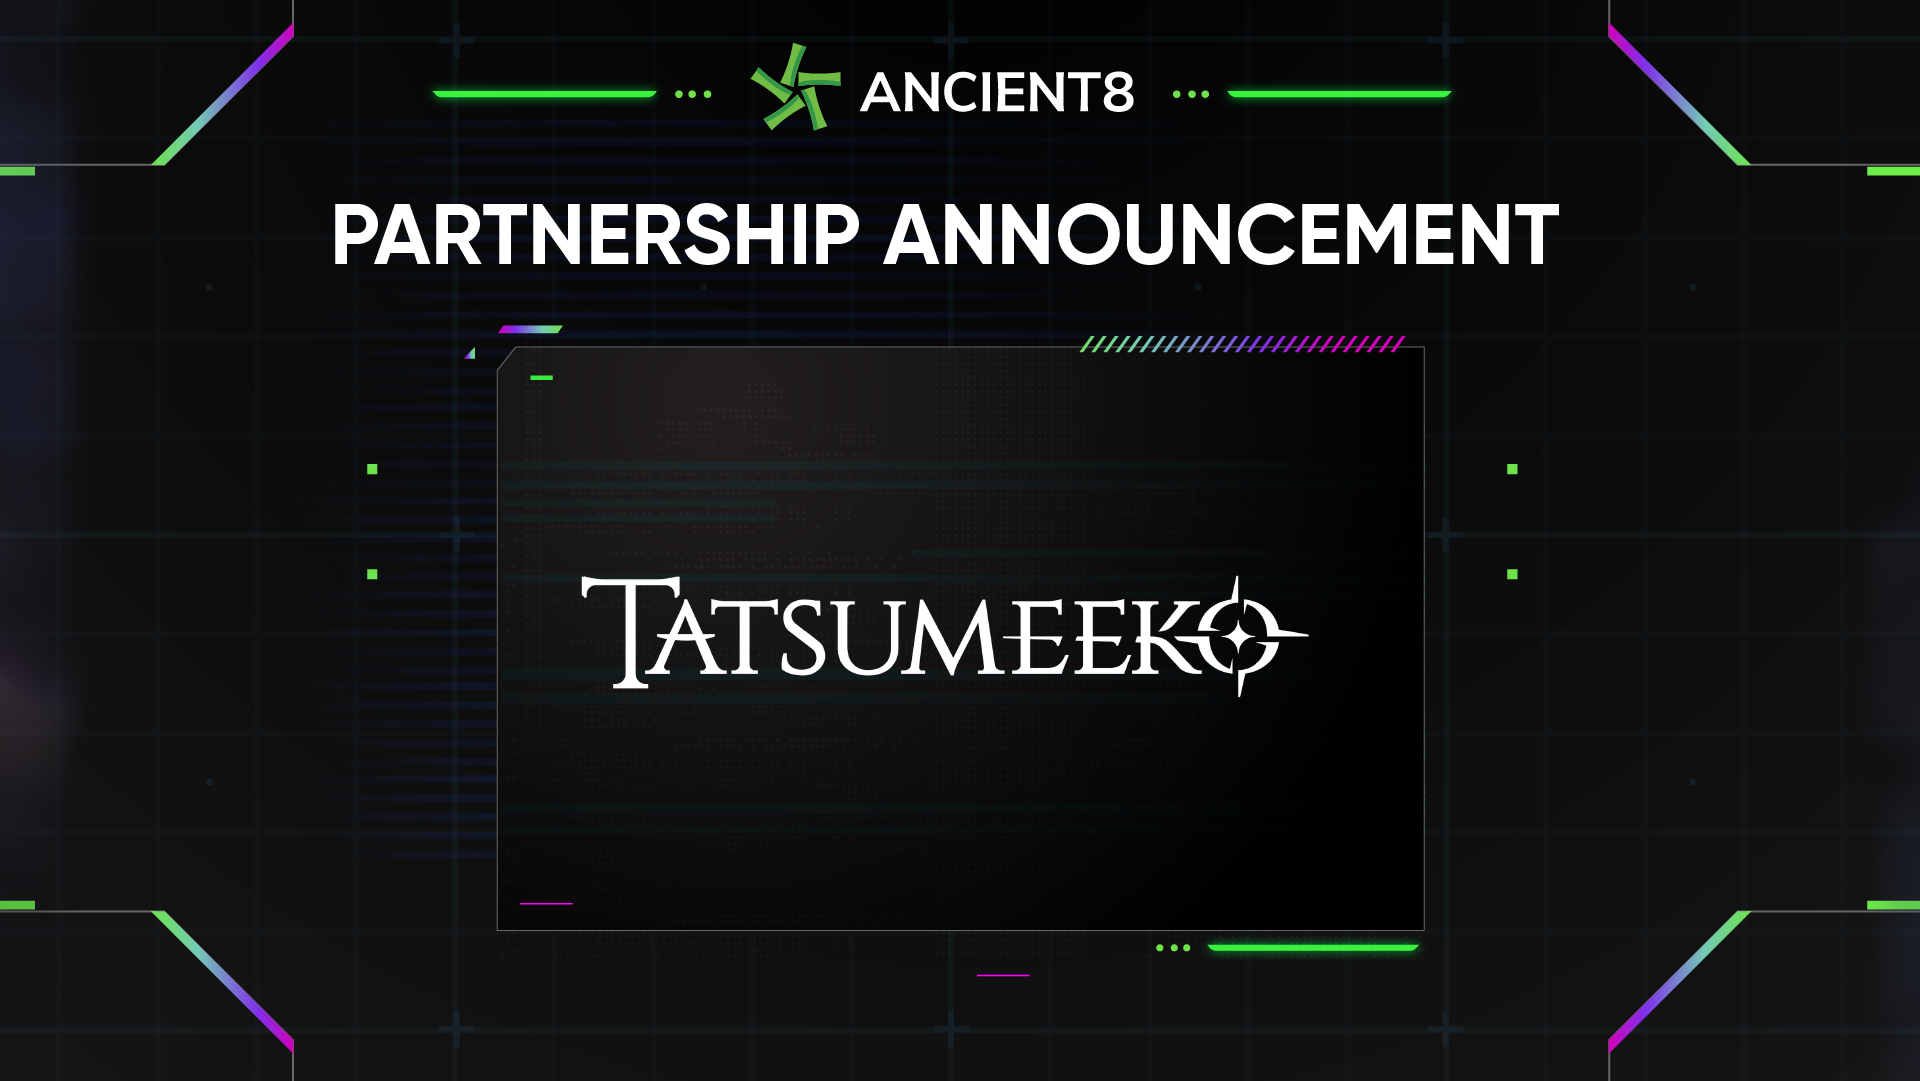 Ancient8 partners with Tatsumeeko, The Fantasy Web3 MMORPG Lite for Discord and Mobile